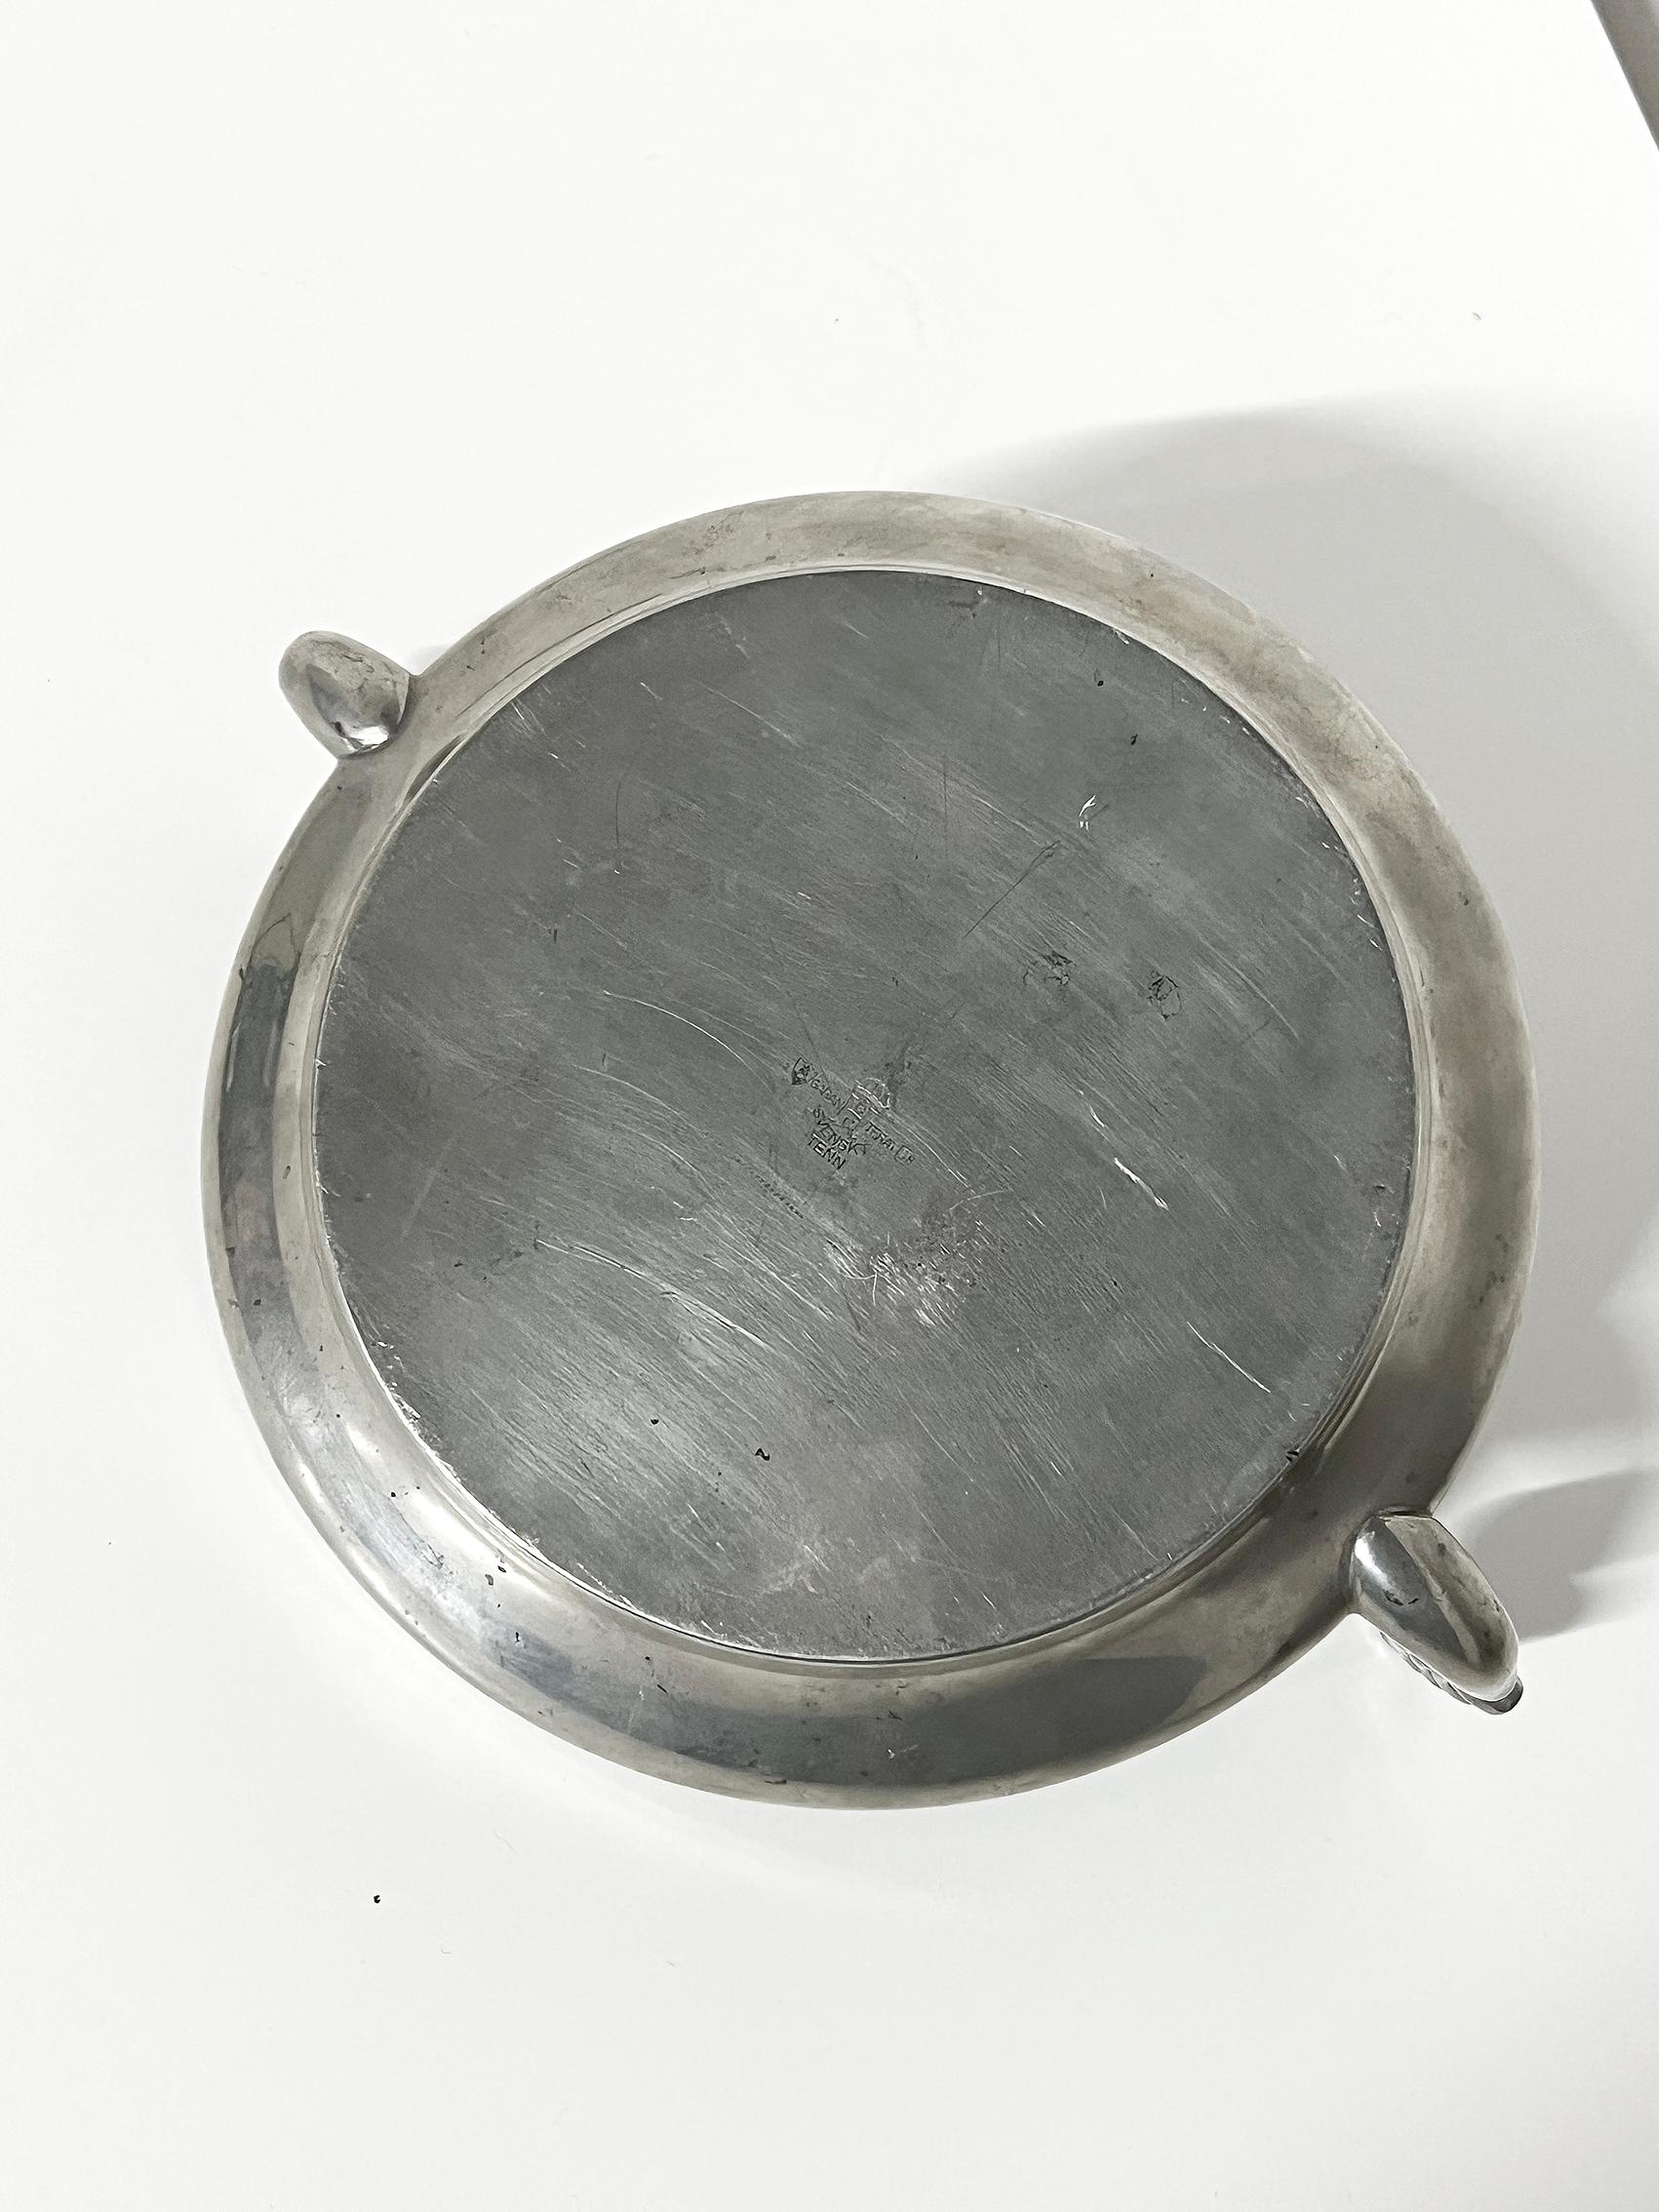 Swedish Modern Bowl in Pewter by CG Hallberg, 1930 For Sale 1